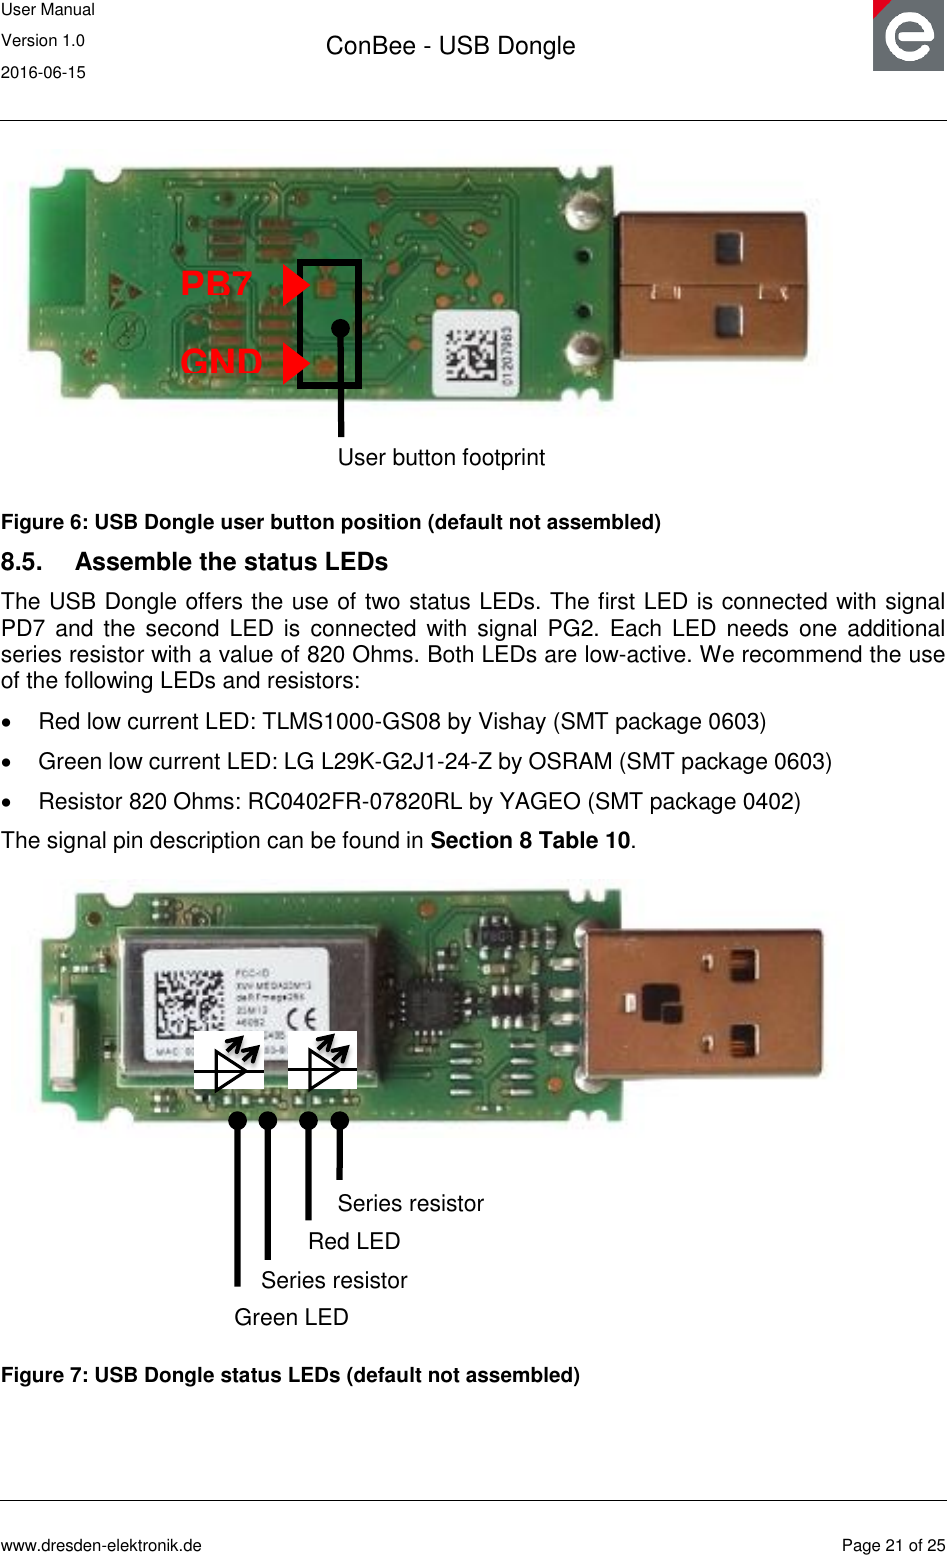 User Manual Version 1.0 2016-06-15  ConBee - USB Dongle      www.dresden-elektronik.de  Page 21 of 25   Figure 6: USB Dongle user button position (default not assembled) 8.5.  Assemble the status LEDs The USB Dongle offers the use of two status LEDs. The first LED is connected with signal PD7 and  the second  LED is  connected  with  signal  PG2.  Each  LED needs  one additional series resistor with a value of 820 Ohms. Both LEDs are low-active. We recommend the use of the following LEDs and resistors:   Red low current LED: TLMS1000-GS08 by Vishay (SMT package 0603)   Green low current LED: LG L29K-G2J1-24-Z by OSRAM (SMT package 0603)   Resistor 820 Ohms: RC0402FR-07820RL by YAGEO (SMT package 0402) The signal pin description can be found in Section 8 Table 10.  Figure 7: USB Dongle status LEDs (default not assembled)  User button footprint PB7 GND Red LED Series resistor Series resistor Green LED 